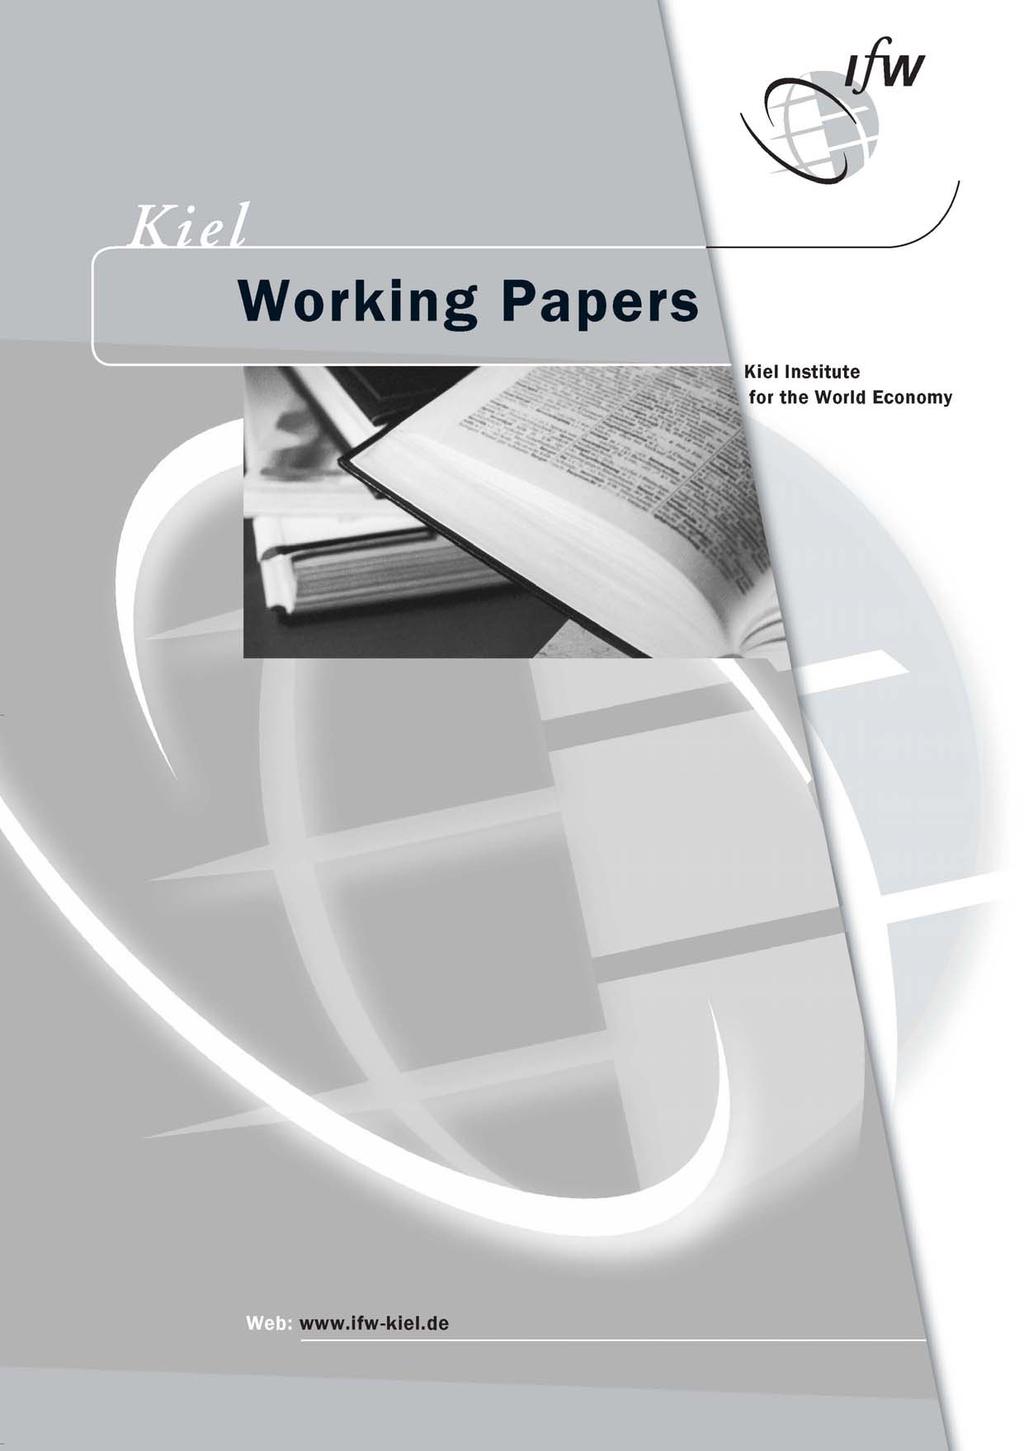 Services offshoring and wages: Evidence from micro